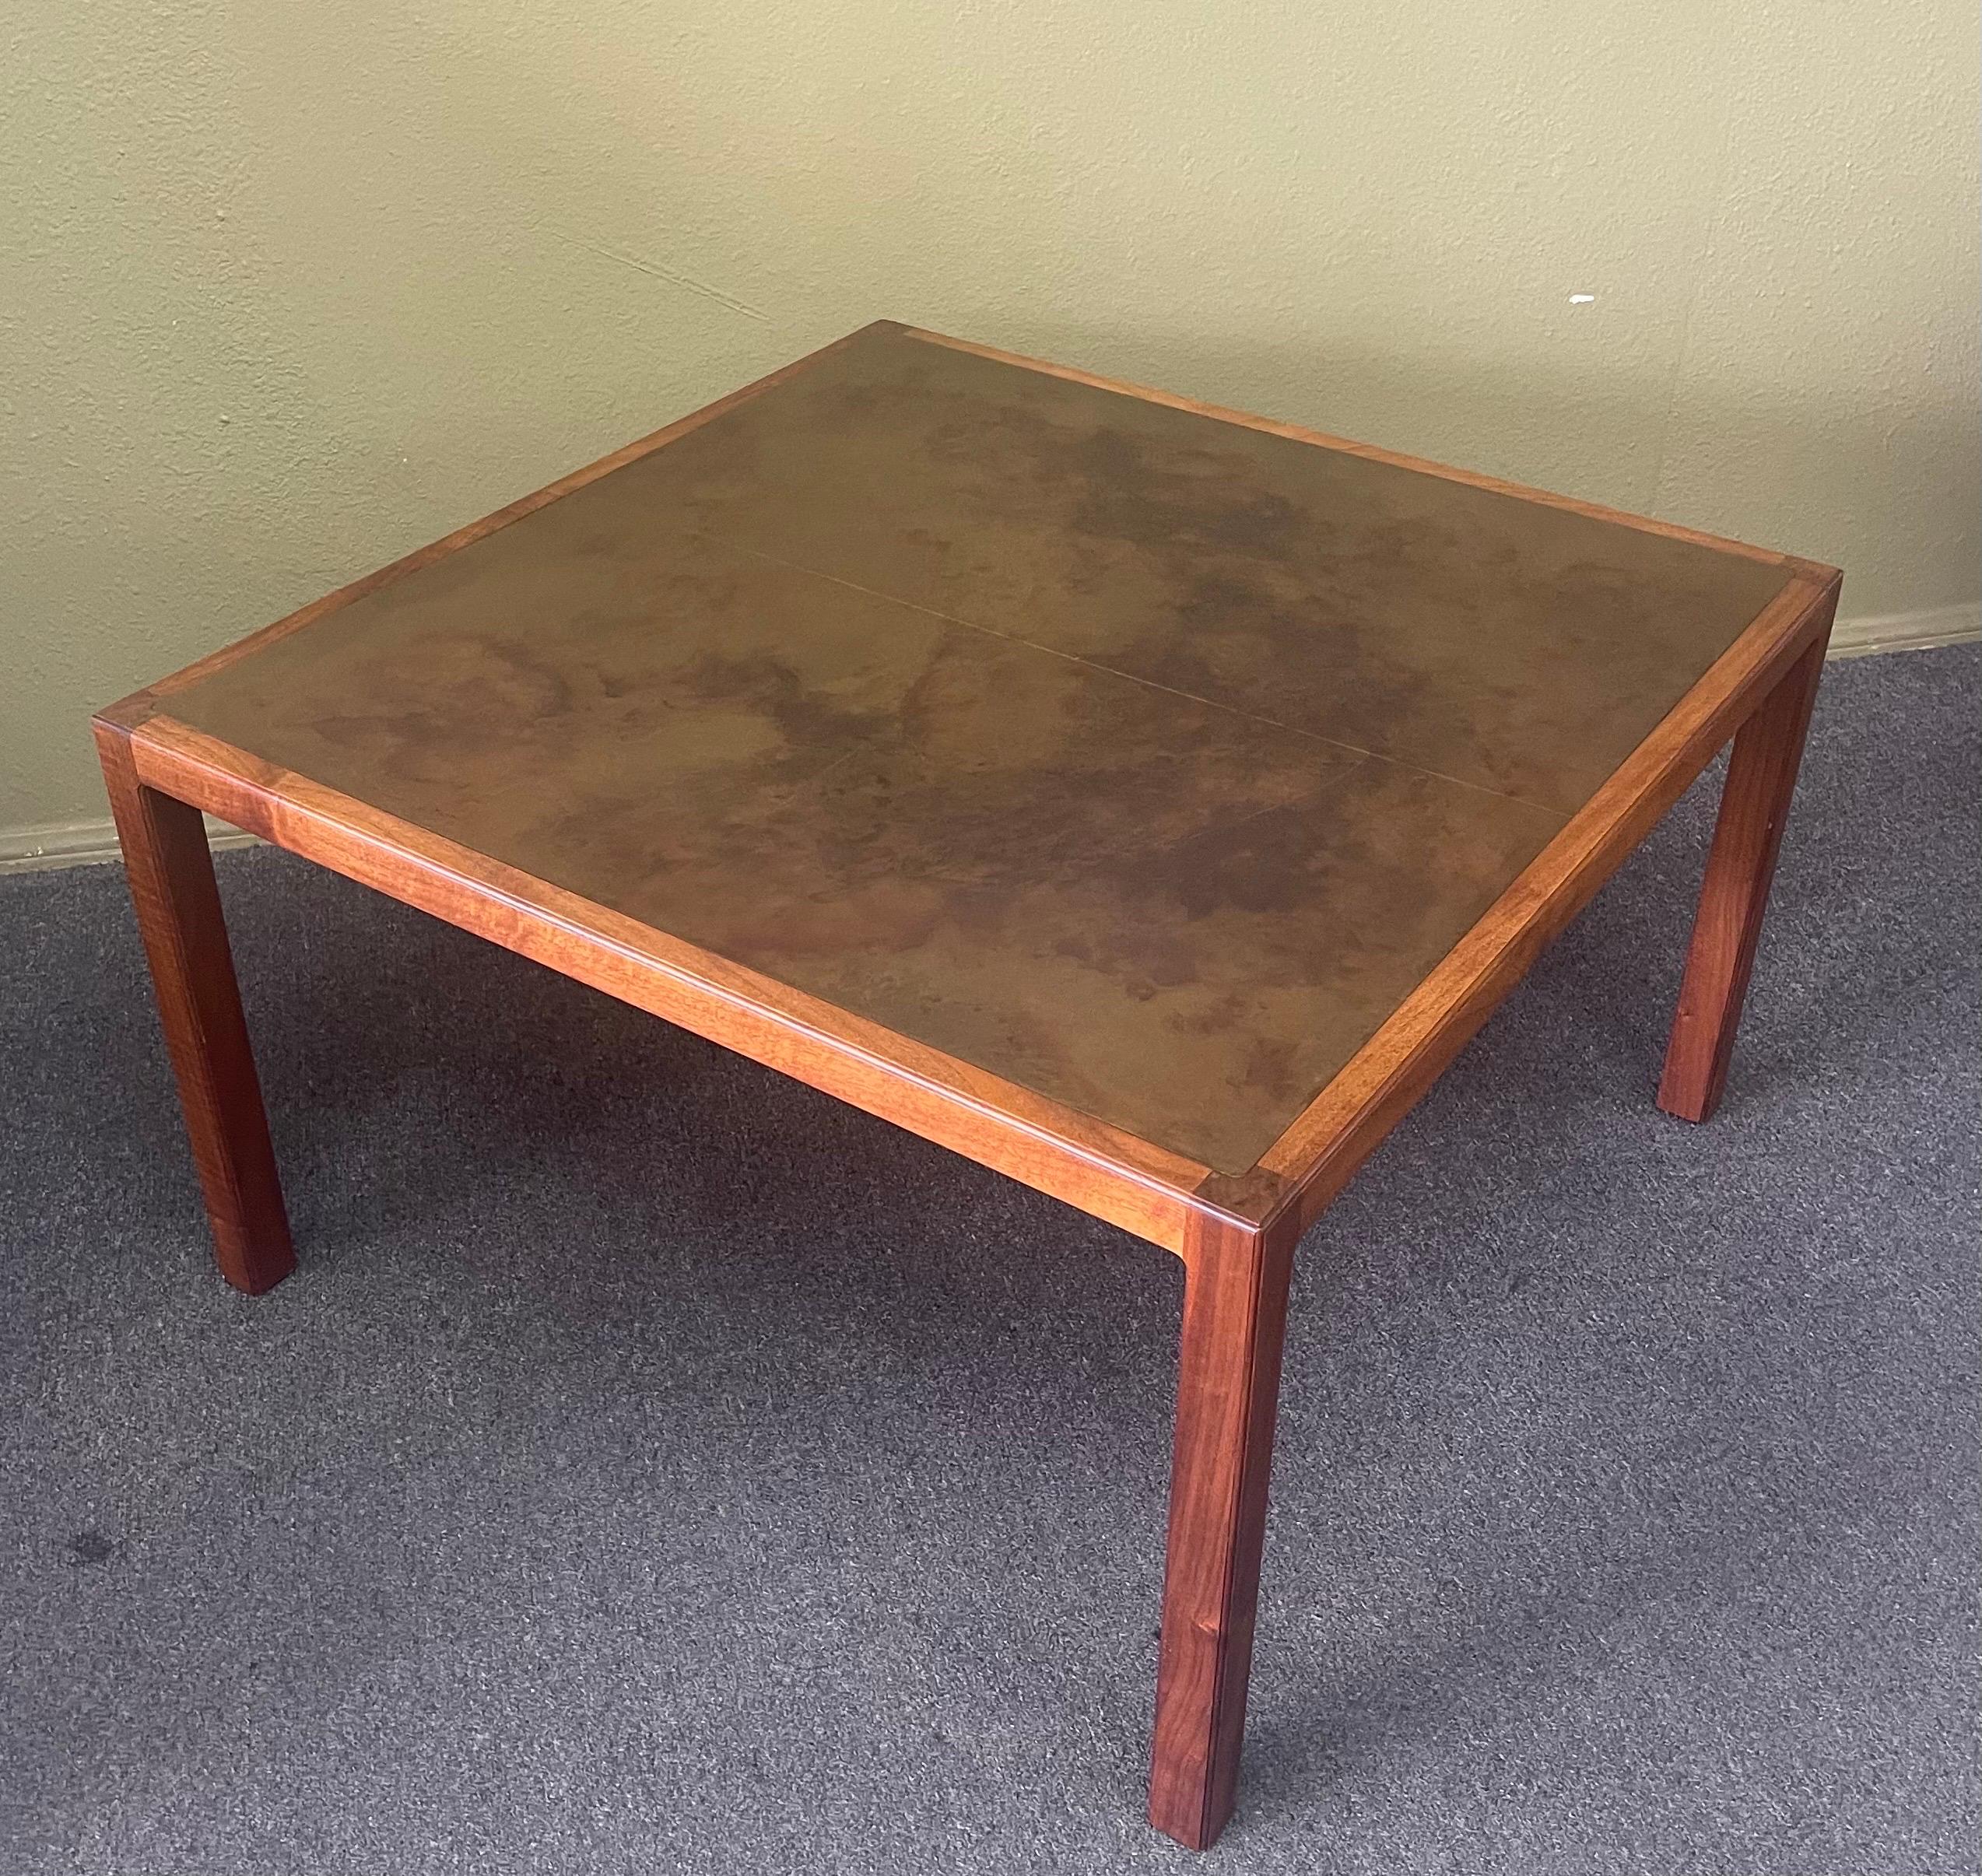 A gorgeous American MCM walnut coffee table with acid etched copper top by Seattle furniture designer Harry Lunstead, circa 1968. Lunstead is renowned for his work with copper and using acid to stain and etch each piece giving it a unique and